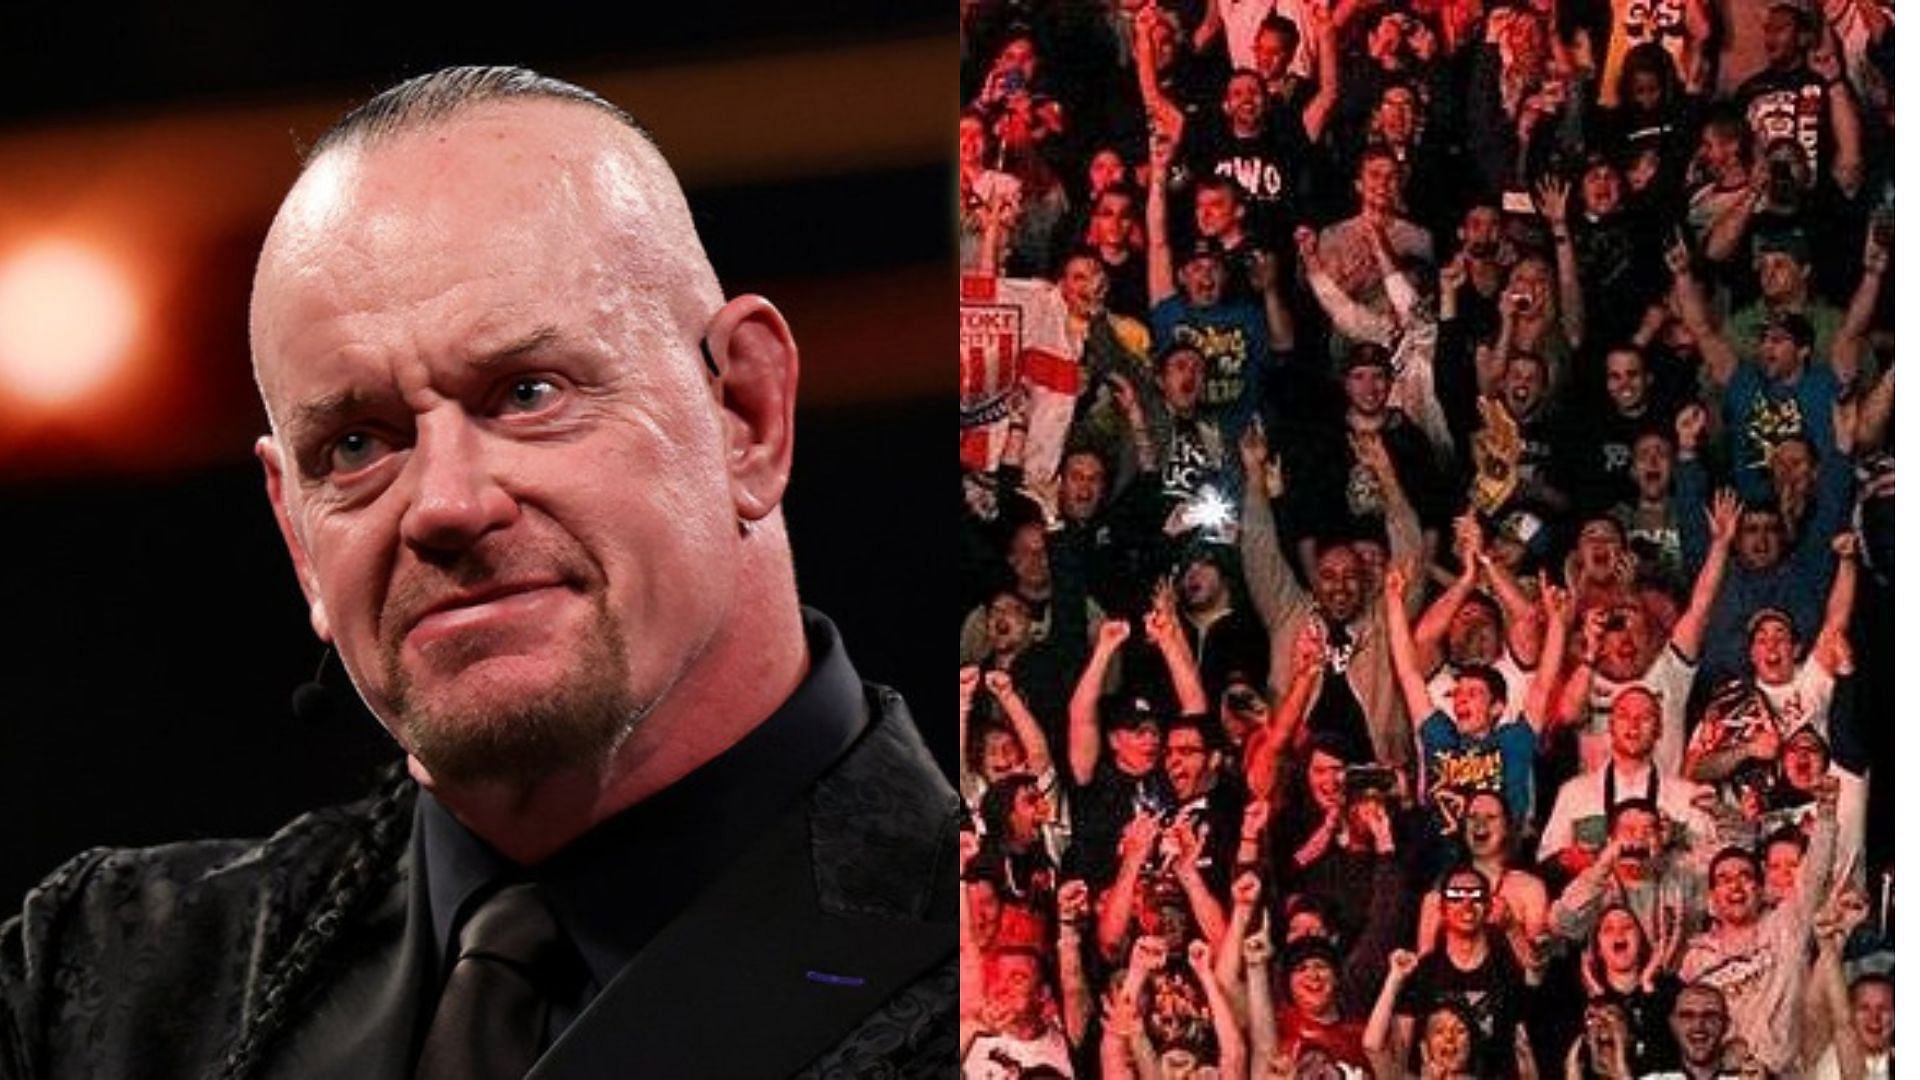 The Undertaker made an appearance on WWE television this week